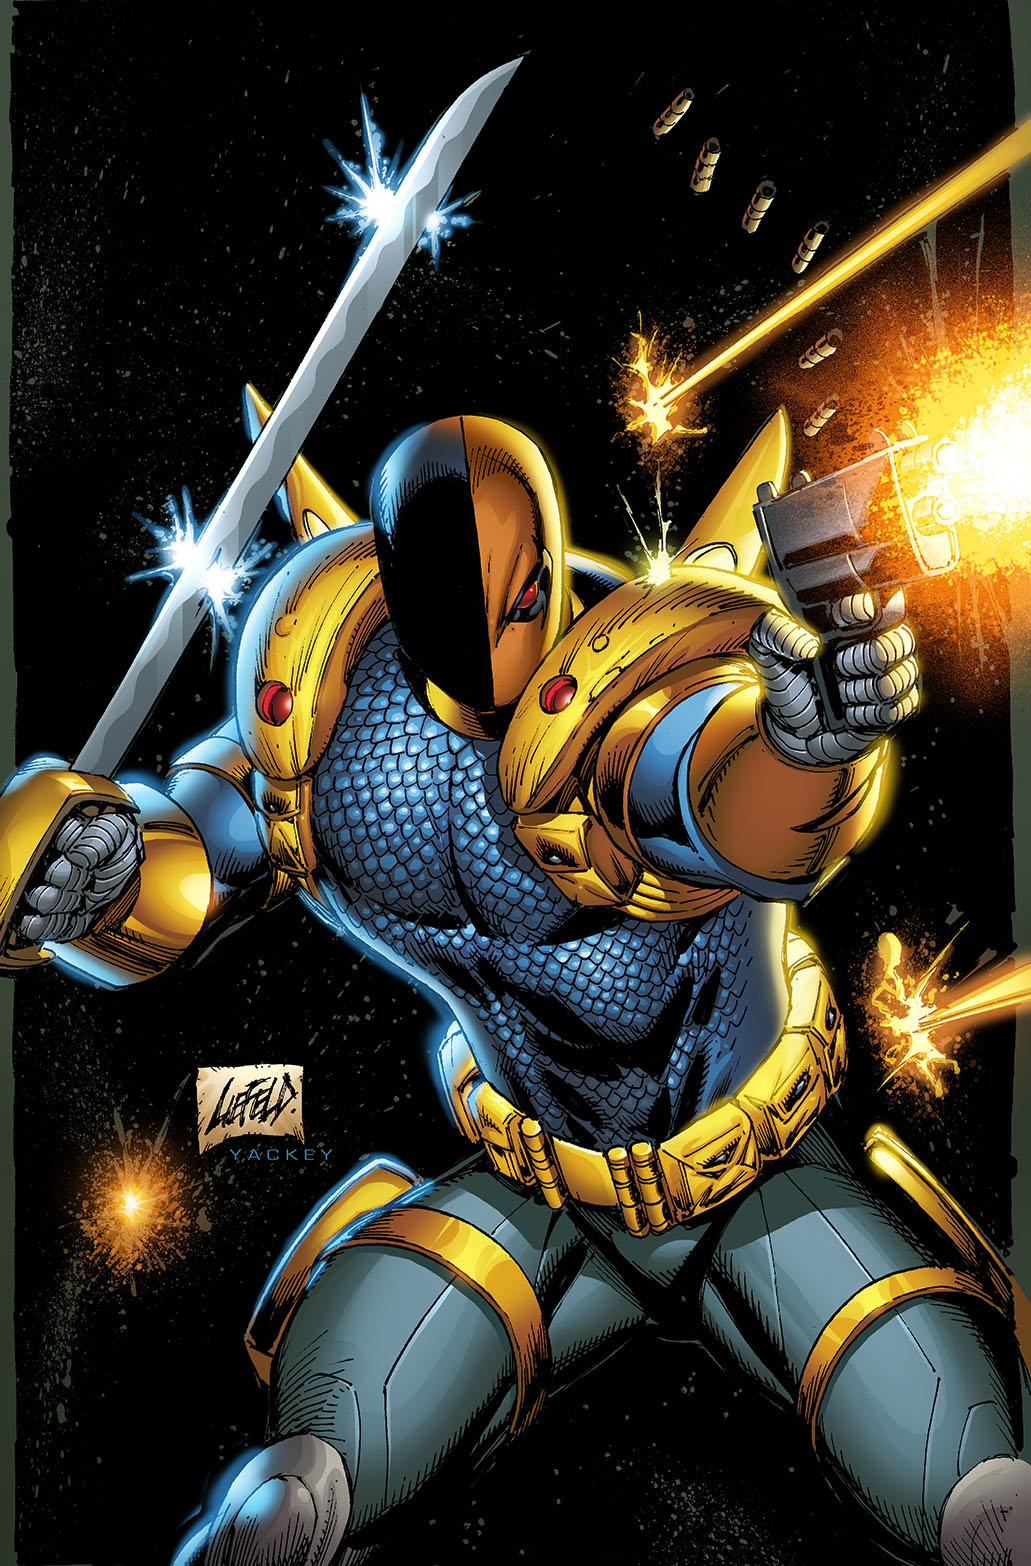 Deathstroke cover done by Rob Liefeld (2012)